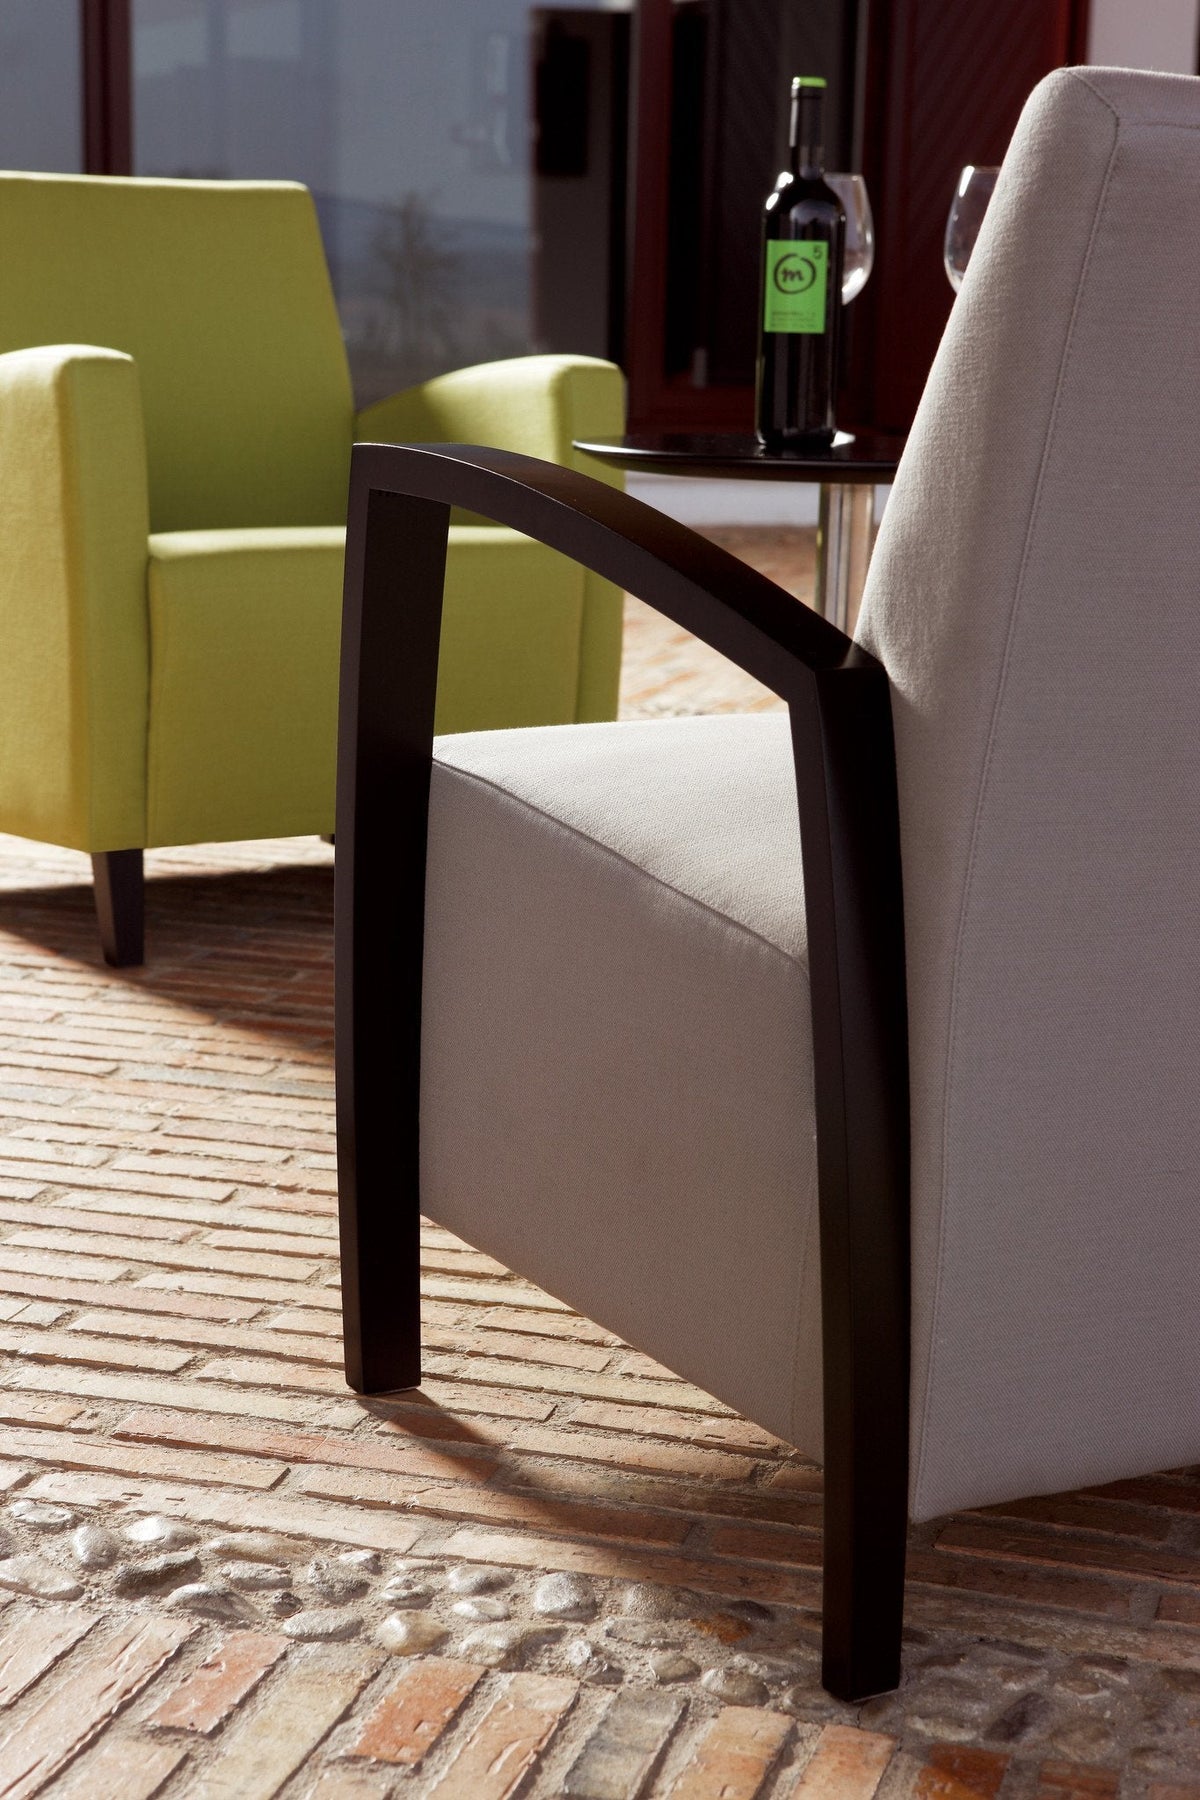 Nómada Lounge Chair-Sancal-Contract Furniture Store